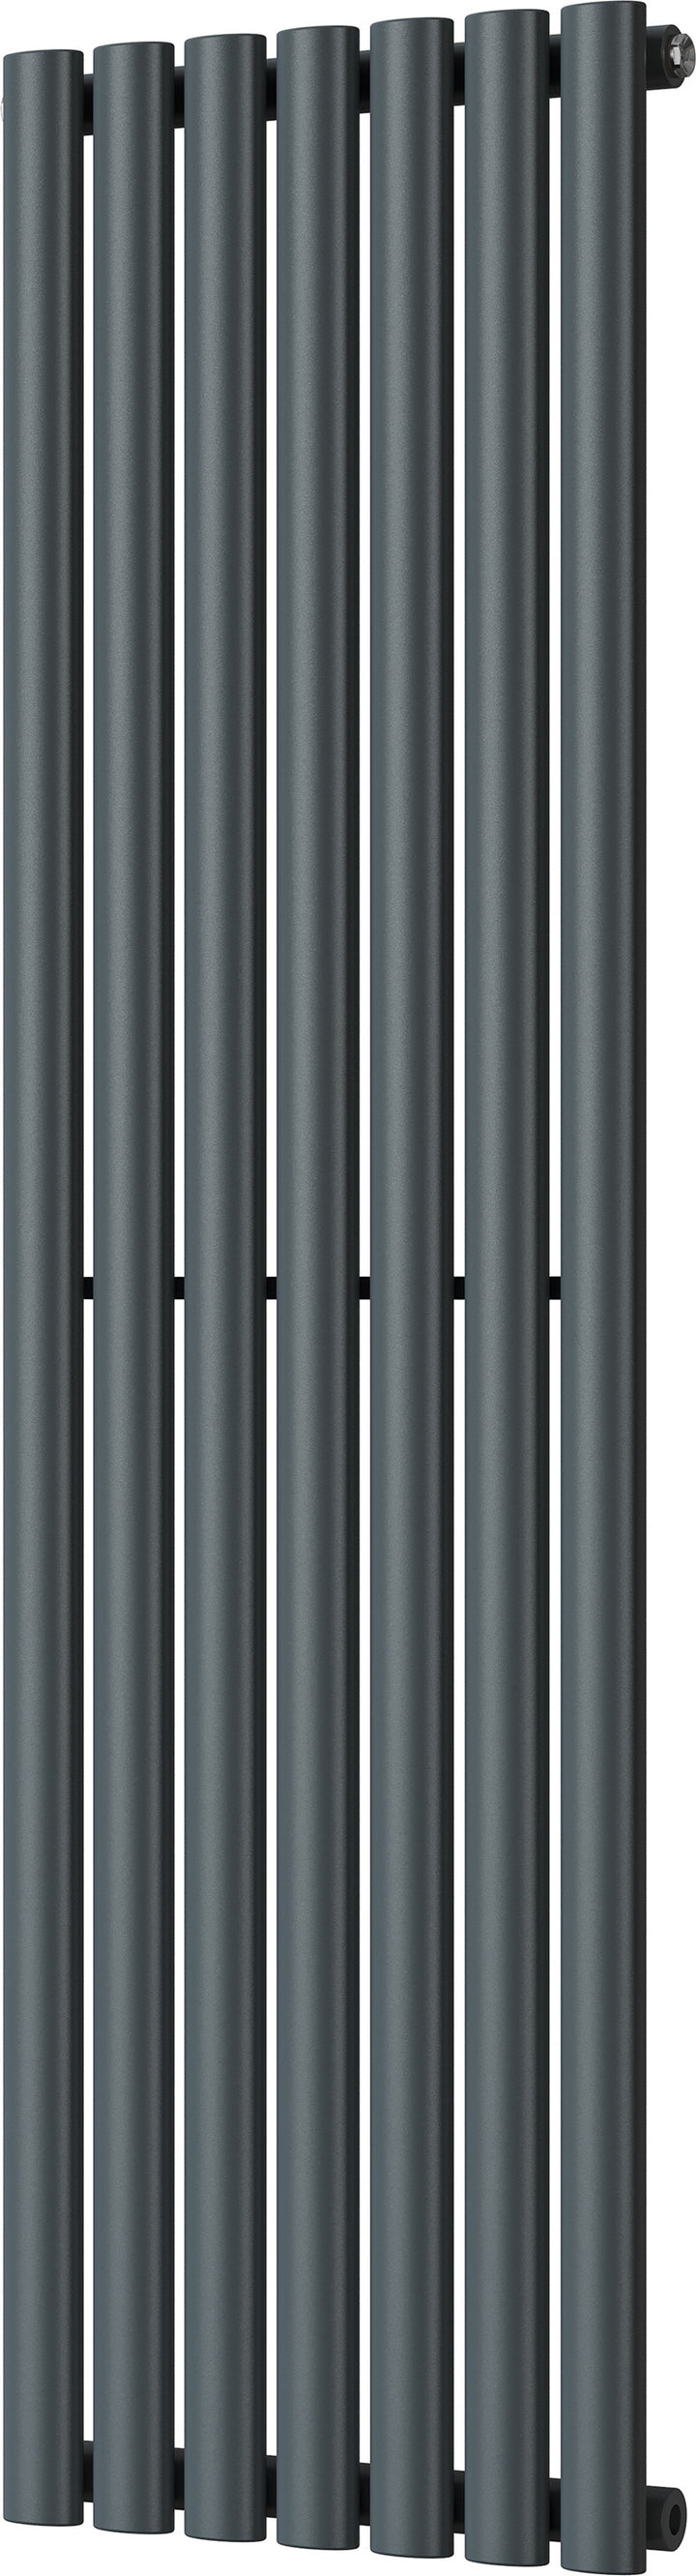 Omeara - Anthracite Vertical Radiator H1400mm x W406mm Single Panel